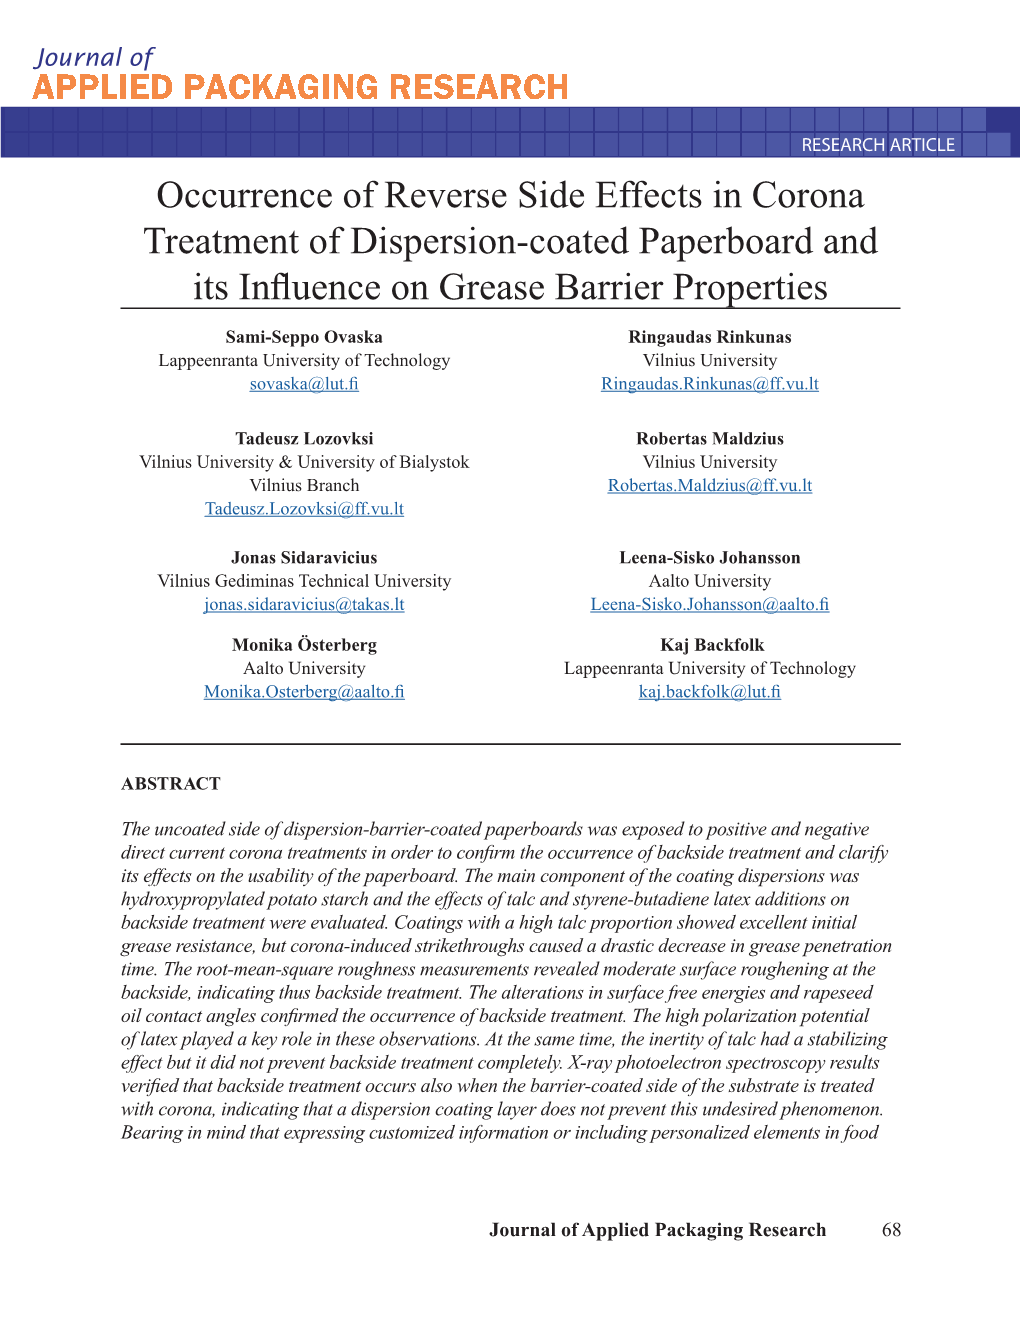 Occurrence of Reverse Side Effects in Corona Treatment of Dispersion